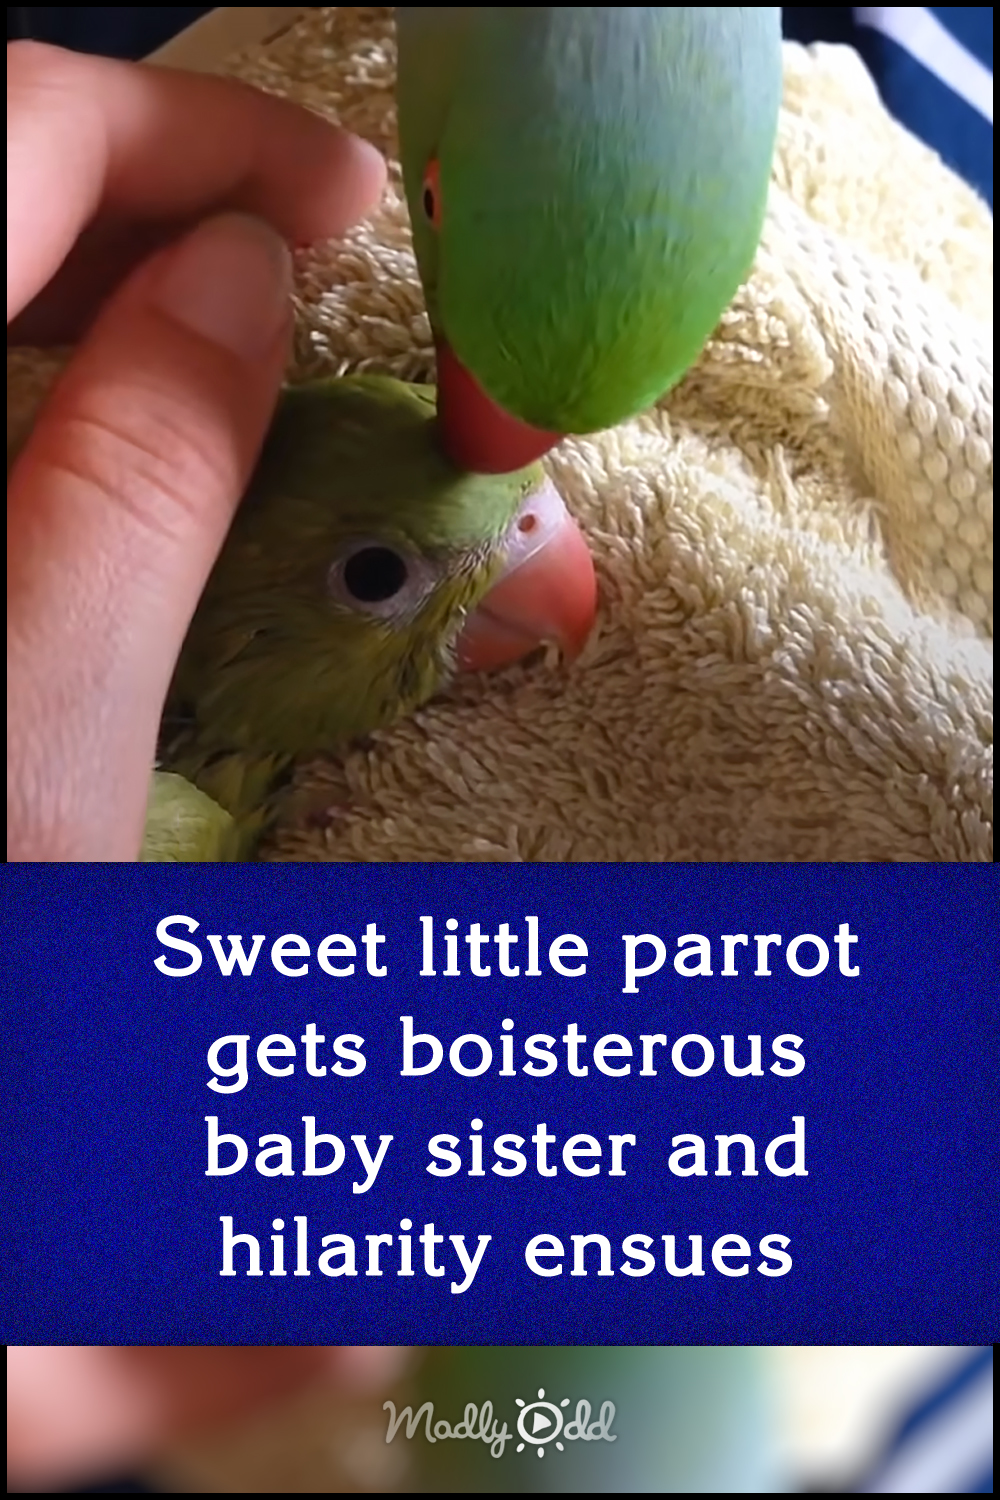 Sweet little parrot gets boisterous baby sister and hilarity ensues